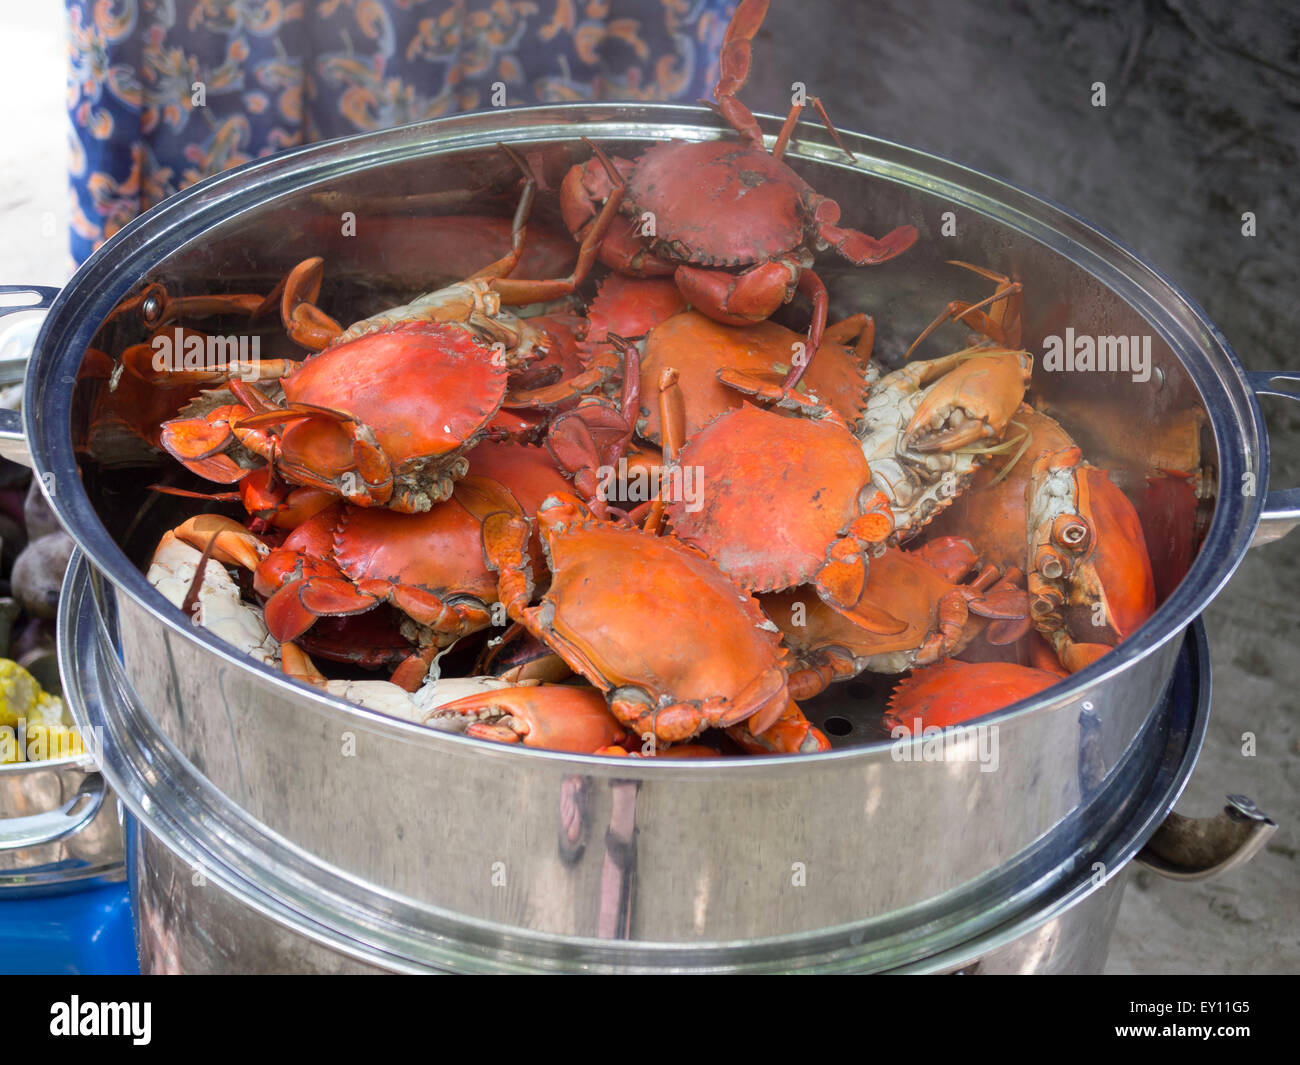 Pot of crabs being cooked in Malaysia Stock Photo